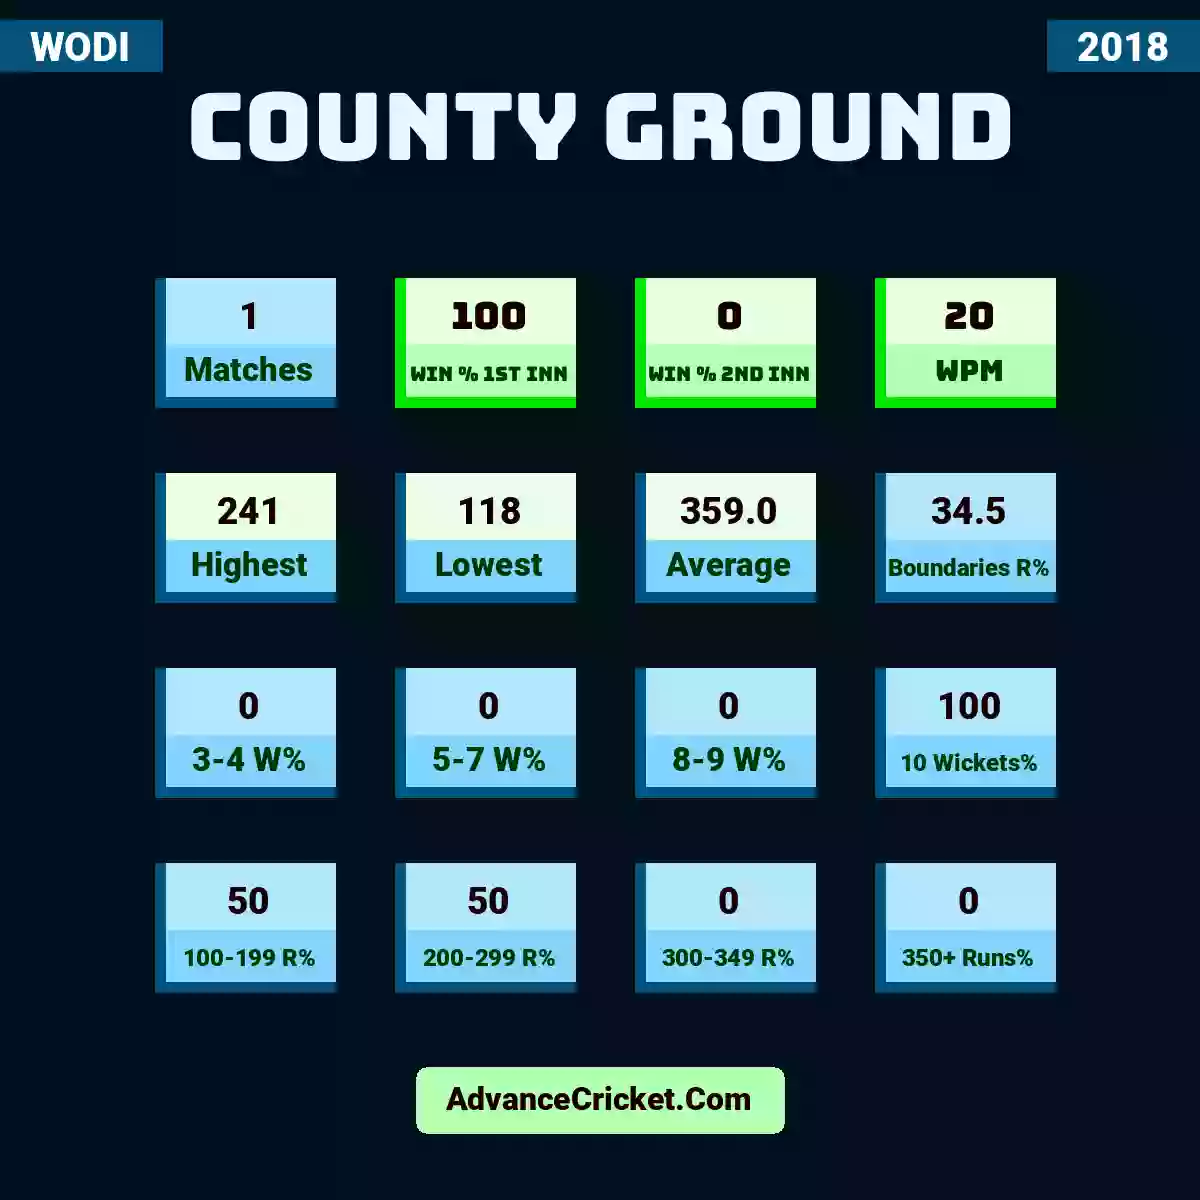 Image showing County Ground with Matches: 1, Win % 1st Inn: 100, Win % 2nd Inn: 0, WPM: 20, Highest: 241, Lowest: 118, Average: 359.0, Boundaries R%: 34.5, 3-4 W%: 0, 5-7 W%: 0, 8-9 W%: 0, 10 Wickets%: 100, 100-199 R%: 50, 200-299 R%: 50, 300-349 R%: 0, 350+ Runs%: 0.